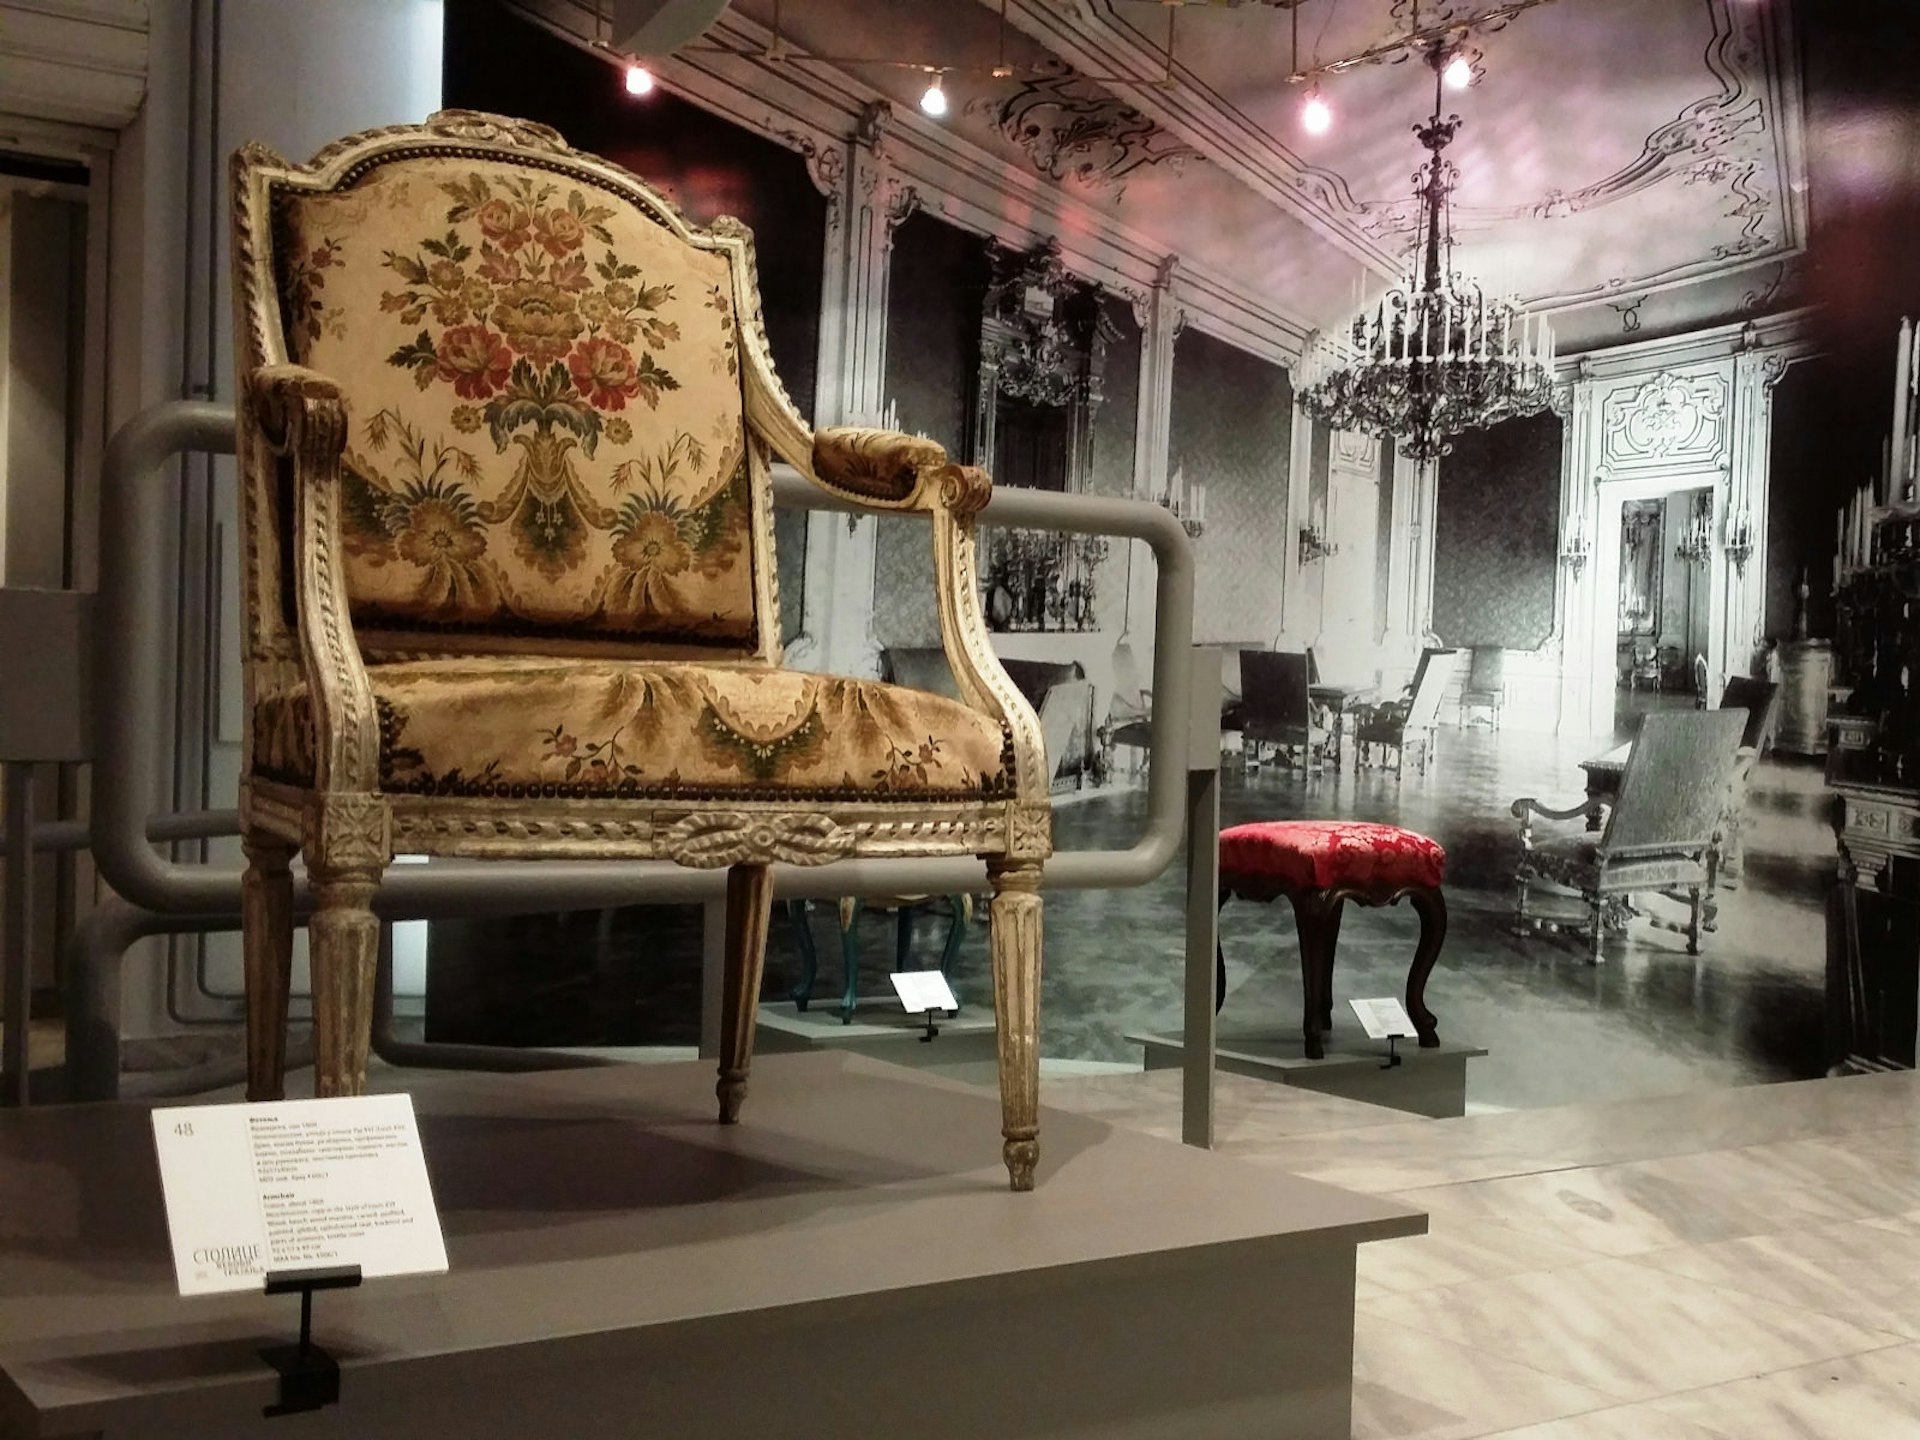 Seating furniture exhibition at the Museum of Applied Arts © Mladen Savkovic / Lonely Planet